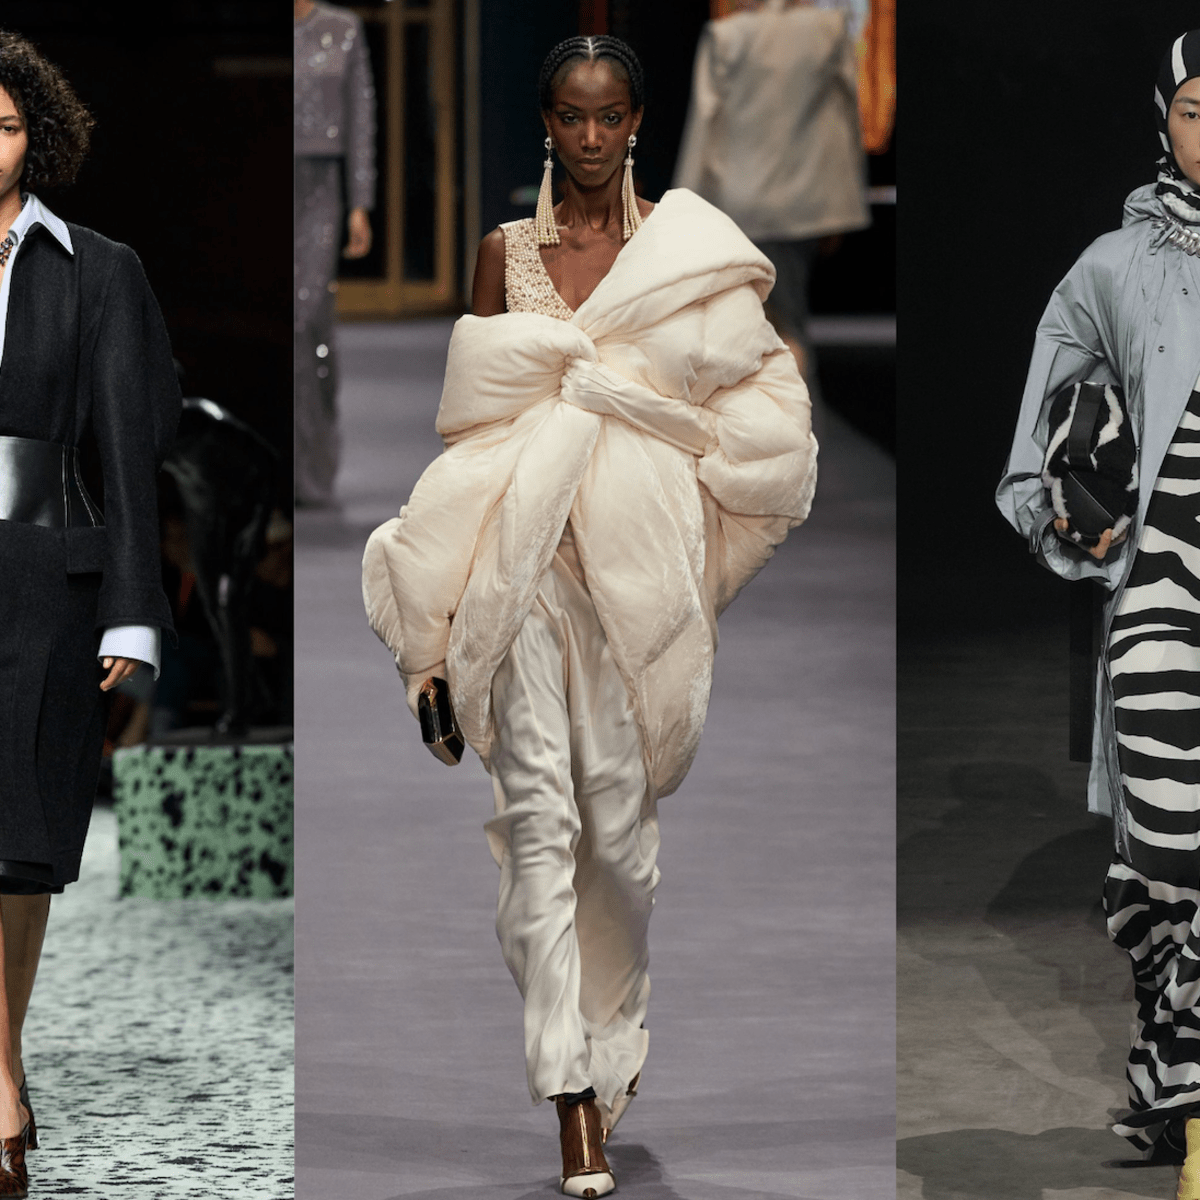 9 Standout Fall 2021 Trends From the Milan Fashion Week Runways